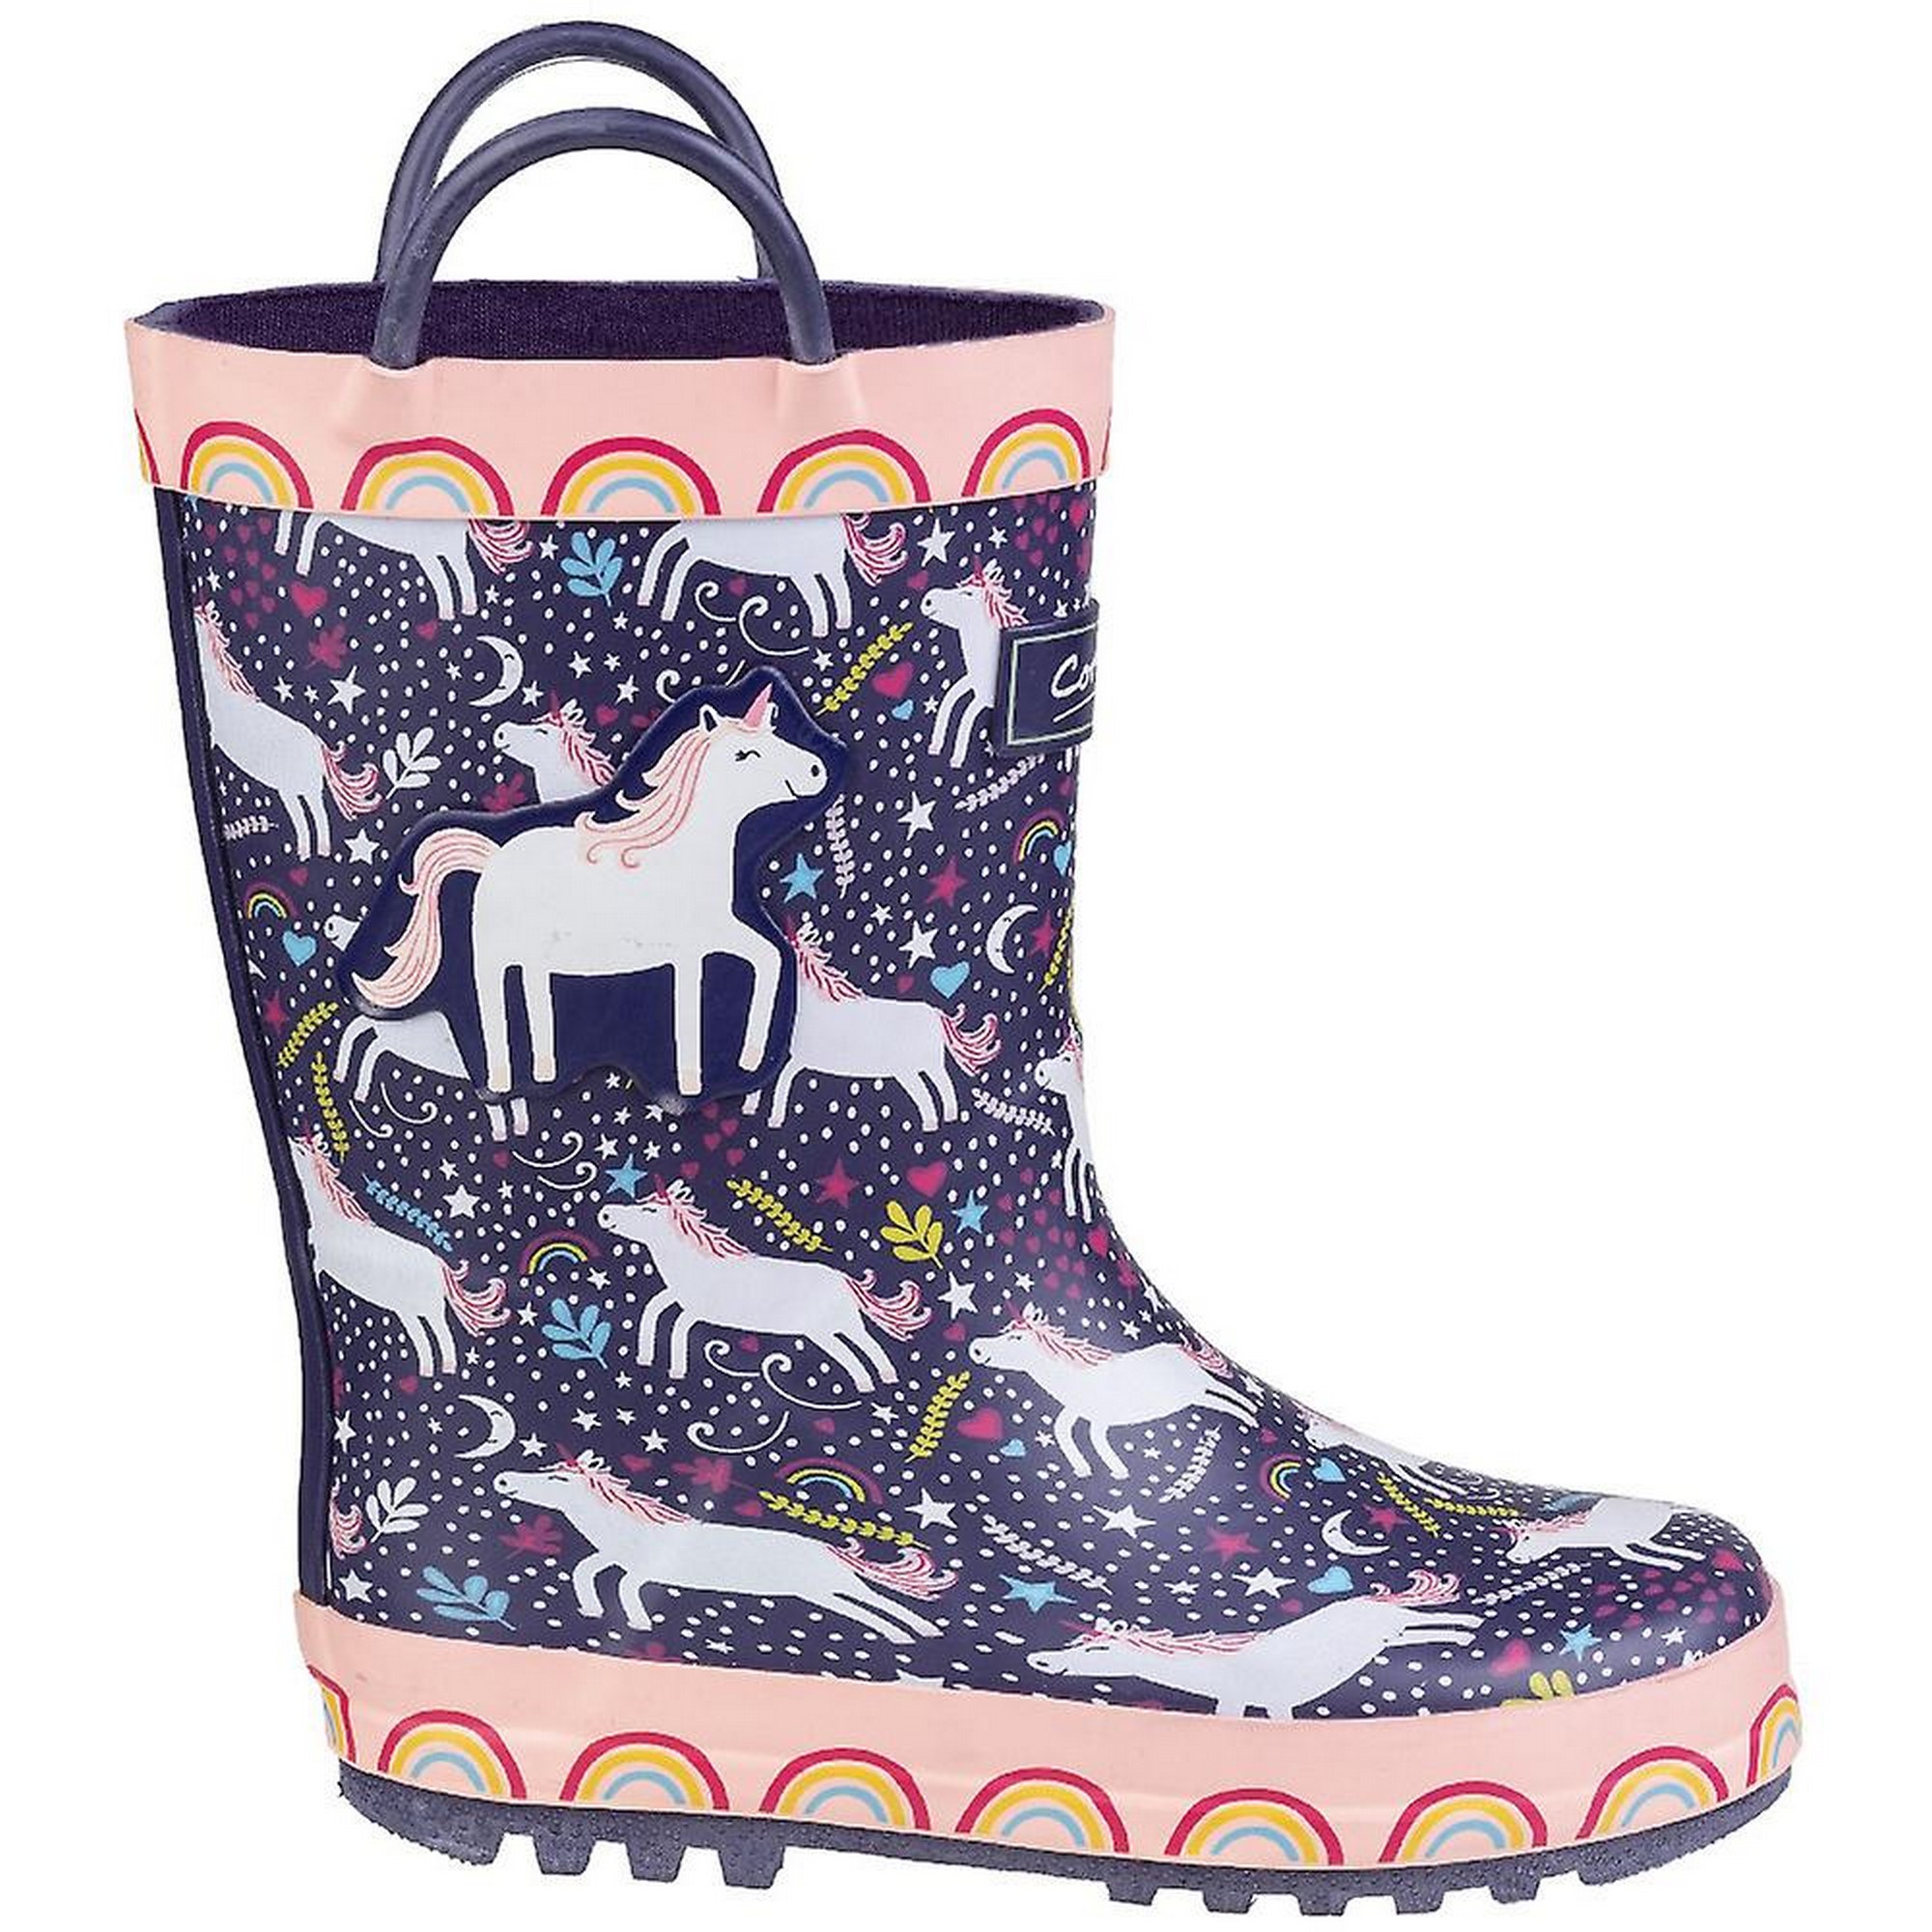 / Sprinkle Wellington Boots Cotswold